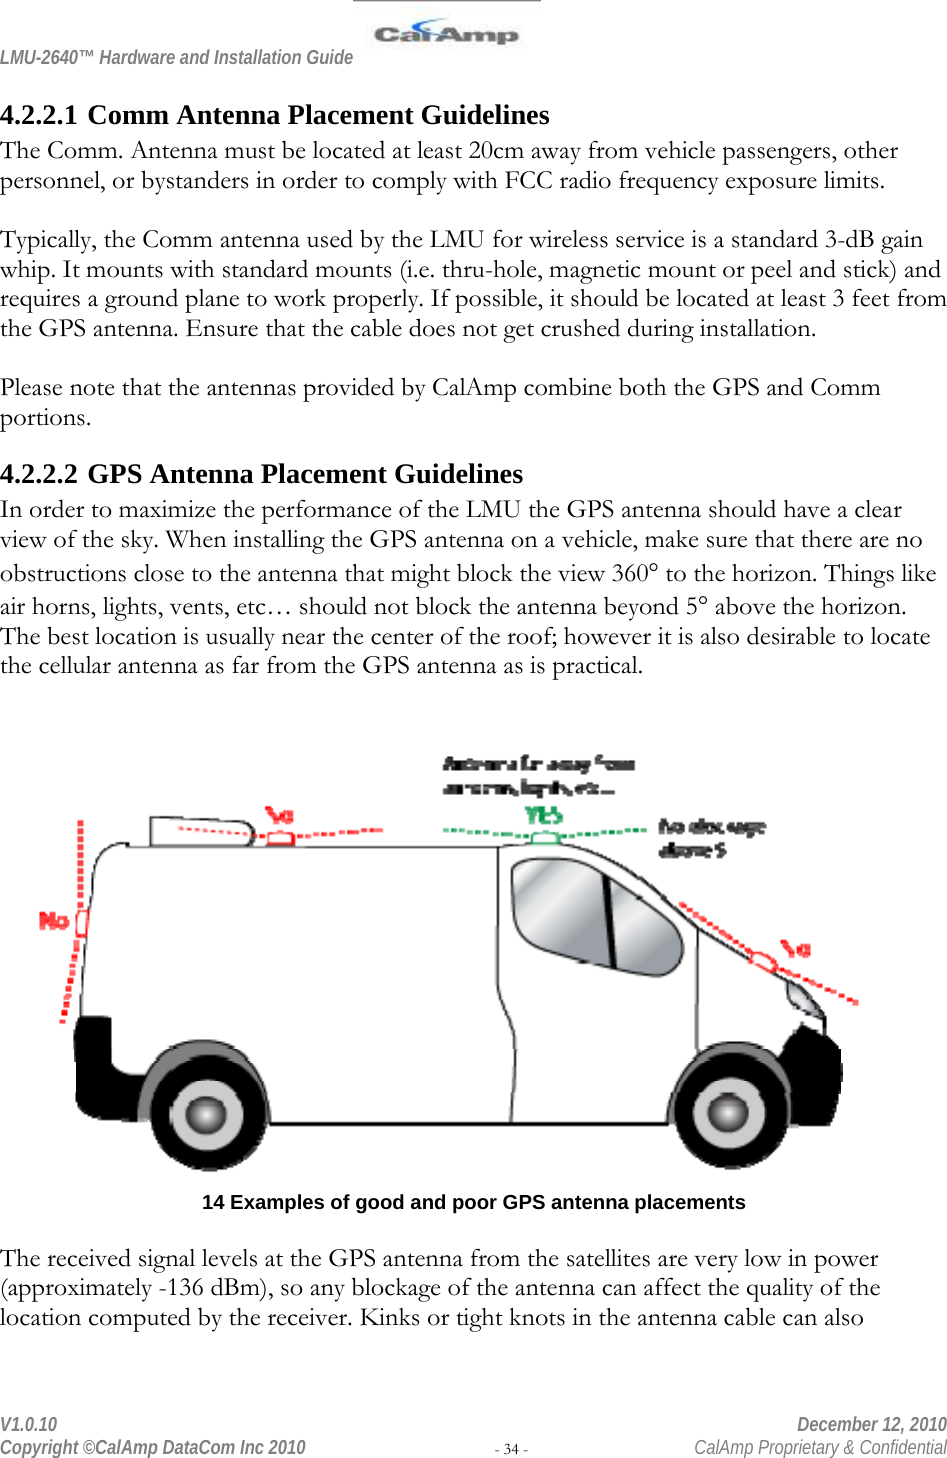 LMU-2640™ Hardware and Installation Guide  V1.0.10    December 12, 2010 Copyright ©CalAmp DataCom Inc 2010 - 34 -  CalAmp Proprietary &amp; Confidential 4.2.2.1 Comm Antenna Placement Guidelines The Comm. Antenna must be located at least 20cm away from vehicle passengers, other personnel, or bystanders in order to comply with FCC radio frequency exposure limits.  Typically, the Comm antenna used by the LMU for wireless service is a standard 3-dB gain whip. It mounts with standard mounts (i.e. thru-hole, magnetic mount or peel and stick) and requires a ground plane to work properly. If possible, it should be located at least 3 feet from the GPS antenna. Ensure that the cable does not get crushed during installation.  Please note that the antennas provided by CalAmp combine both the GPS and Comm portions. 4.2.2.2 GPS Antenna Placement Guidelines In order to maximize the performance of the LMU the GPS antenna should have a clear view of the sky. When installing the GPS antenna on a vehicle, make sure that there are no obstructions close to the antenna that might block the view 360 to the horizon. Things like air horns, lights, vents, etc… should not block the antenna beyond 5 above the horizon. The best location is usually near the center of the roof; however it is also desirable to locate the cellular antenna as far from the GPS antenna as is practical.   14 Examples of good and poor GPS antenna placements  The received signal levels at the GPS antenna from the satellites are very low in power (approximately -136 dBm), so any blockage of the antenna can affect the quality of the location computed by the receiver. Kinks or tight knots in the antenna cable can also 